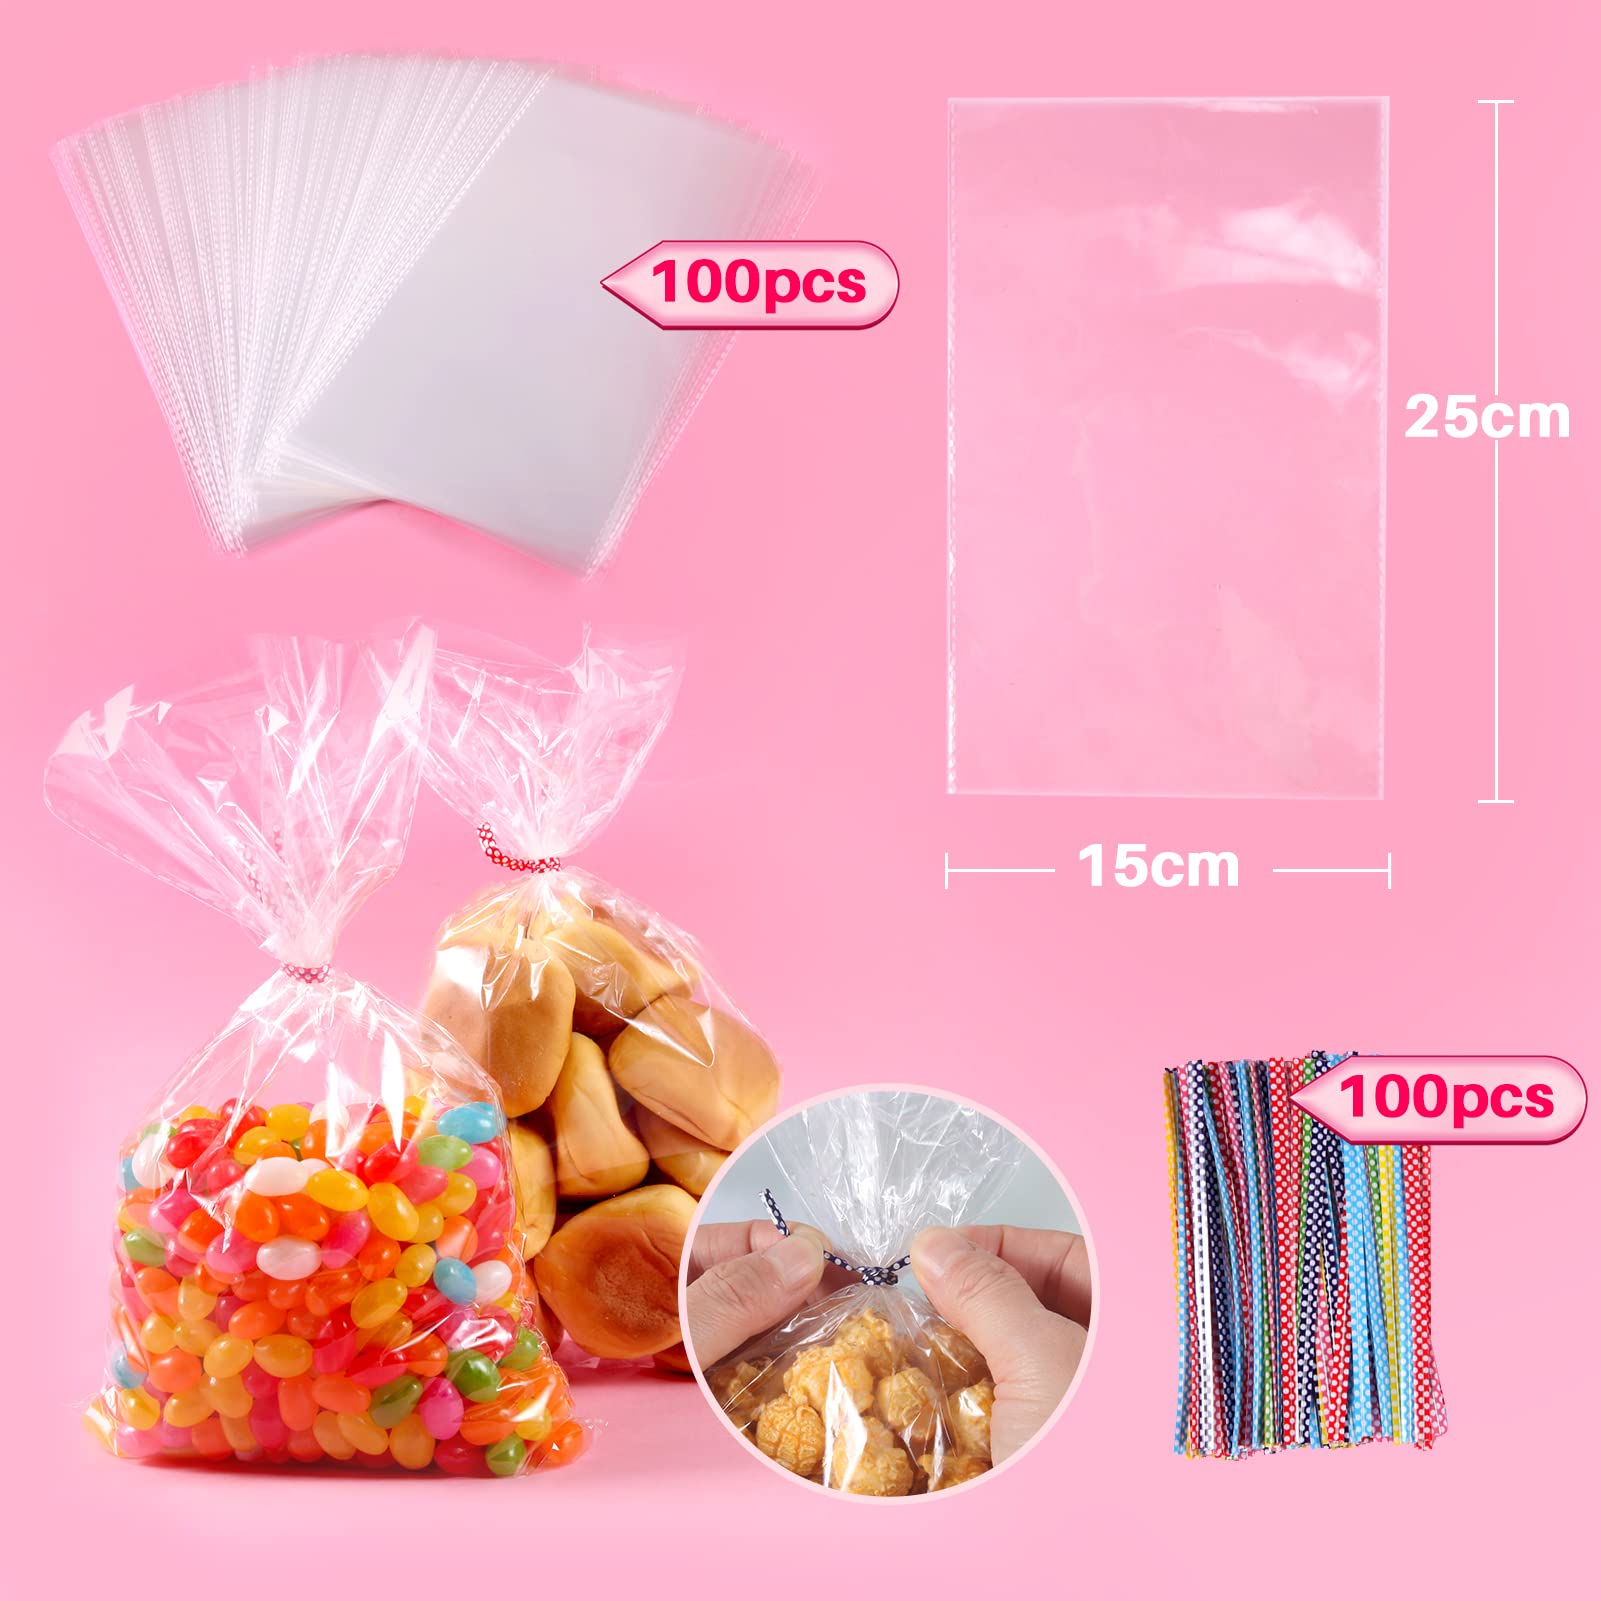 ihaspoko 100 Pieces Transparent Cellophane Bags with 100 Twist Ties for Candy Cookies Sweets (25x15cm)